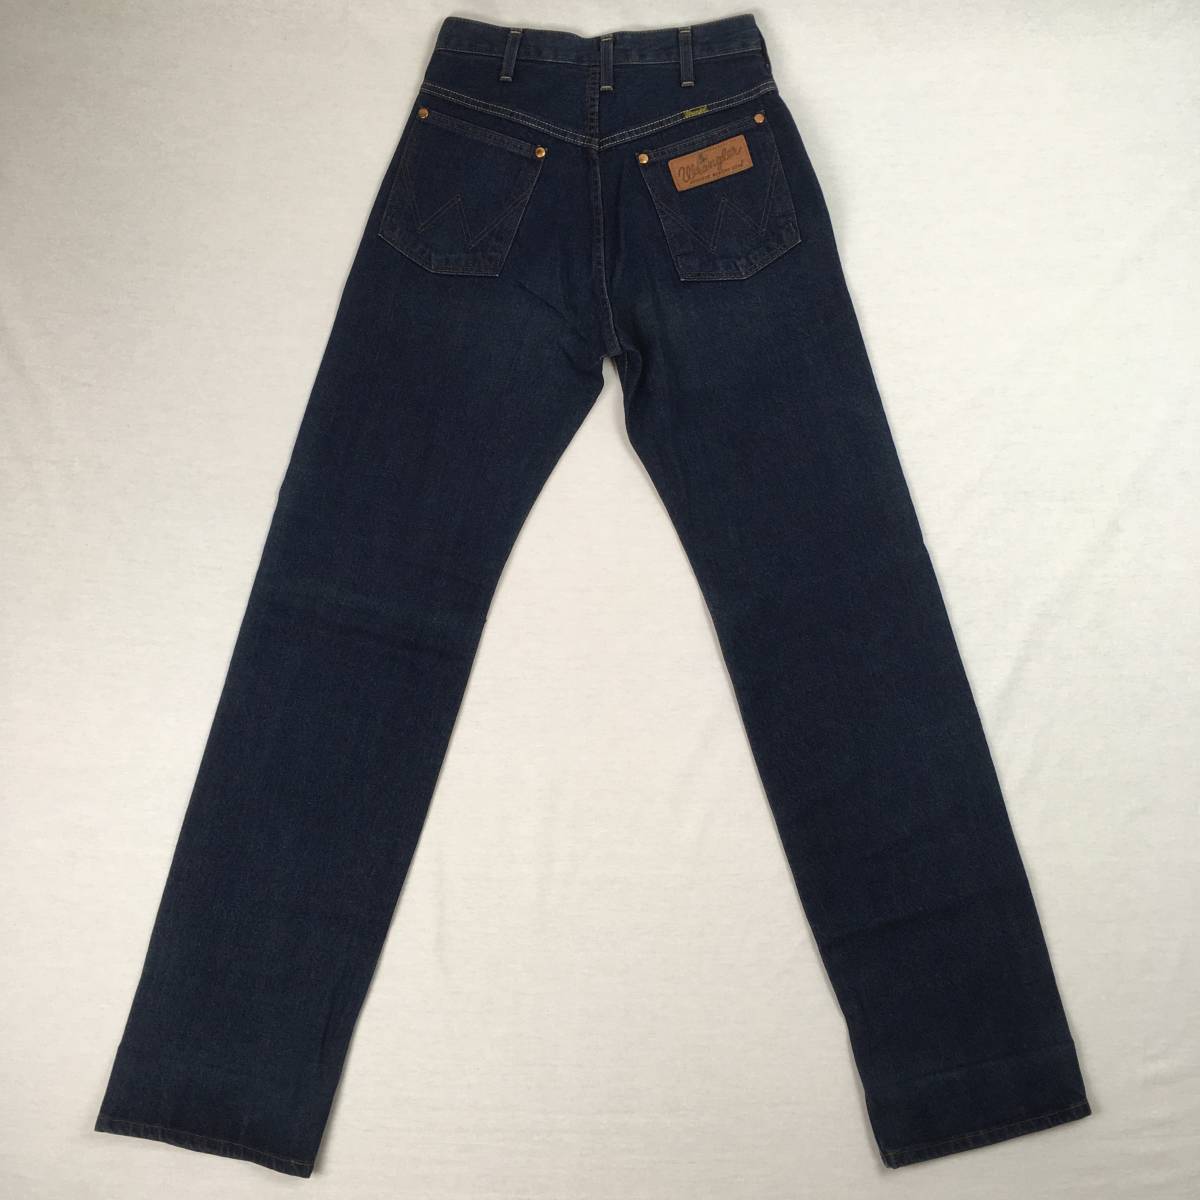 [ new goods ]Wrangler Wrangler M1704 made in Japan Denim pants jeans W28 Zip fly leather patch red side break up 